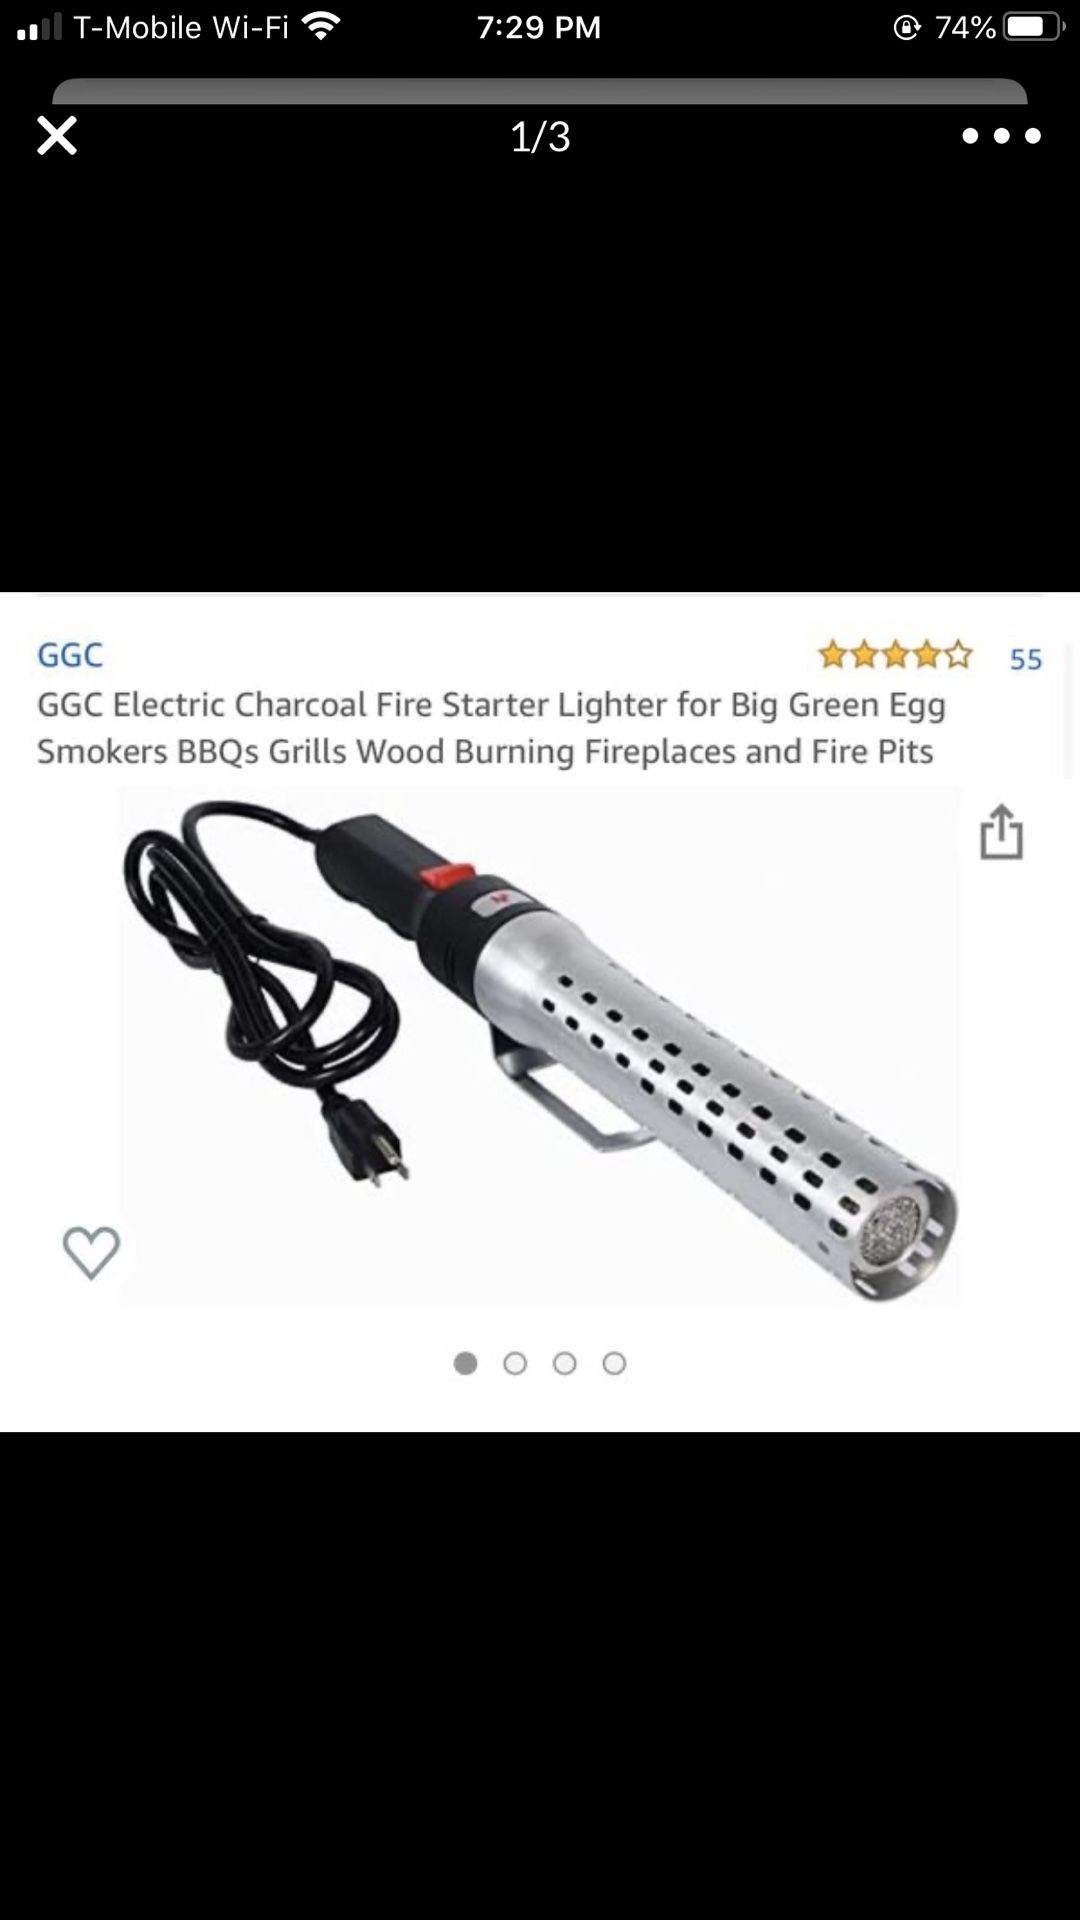 NEW- GGC Electric Charcoal Fire Starter Lighter for Big Green Egg Smokers BBQs Grills Wood Burning